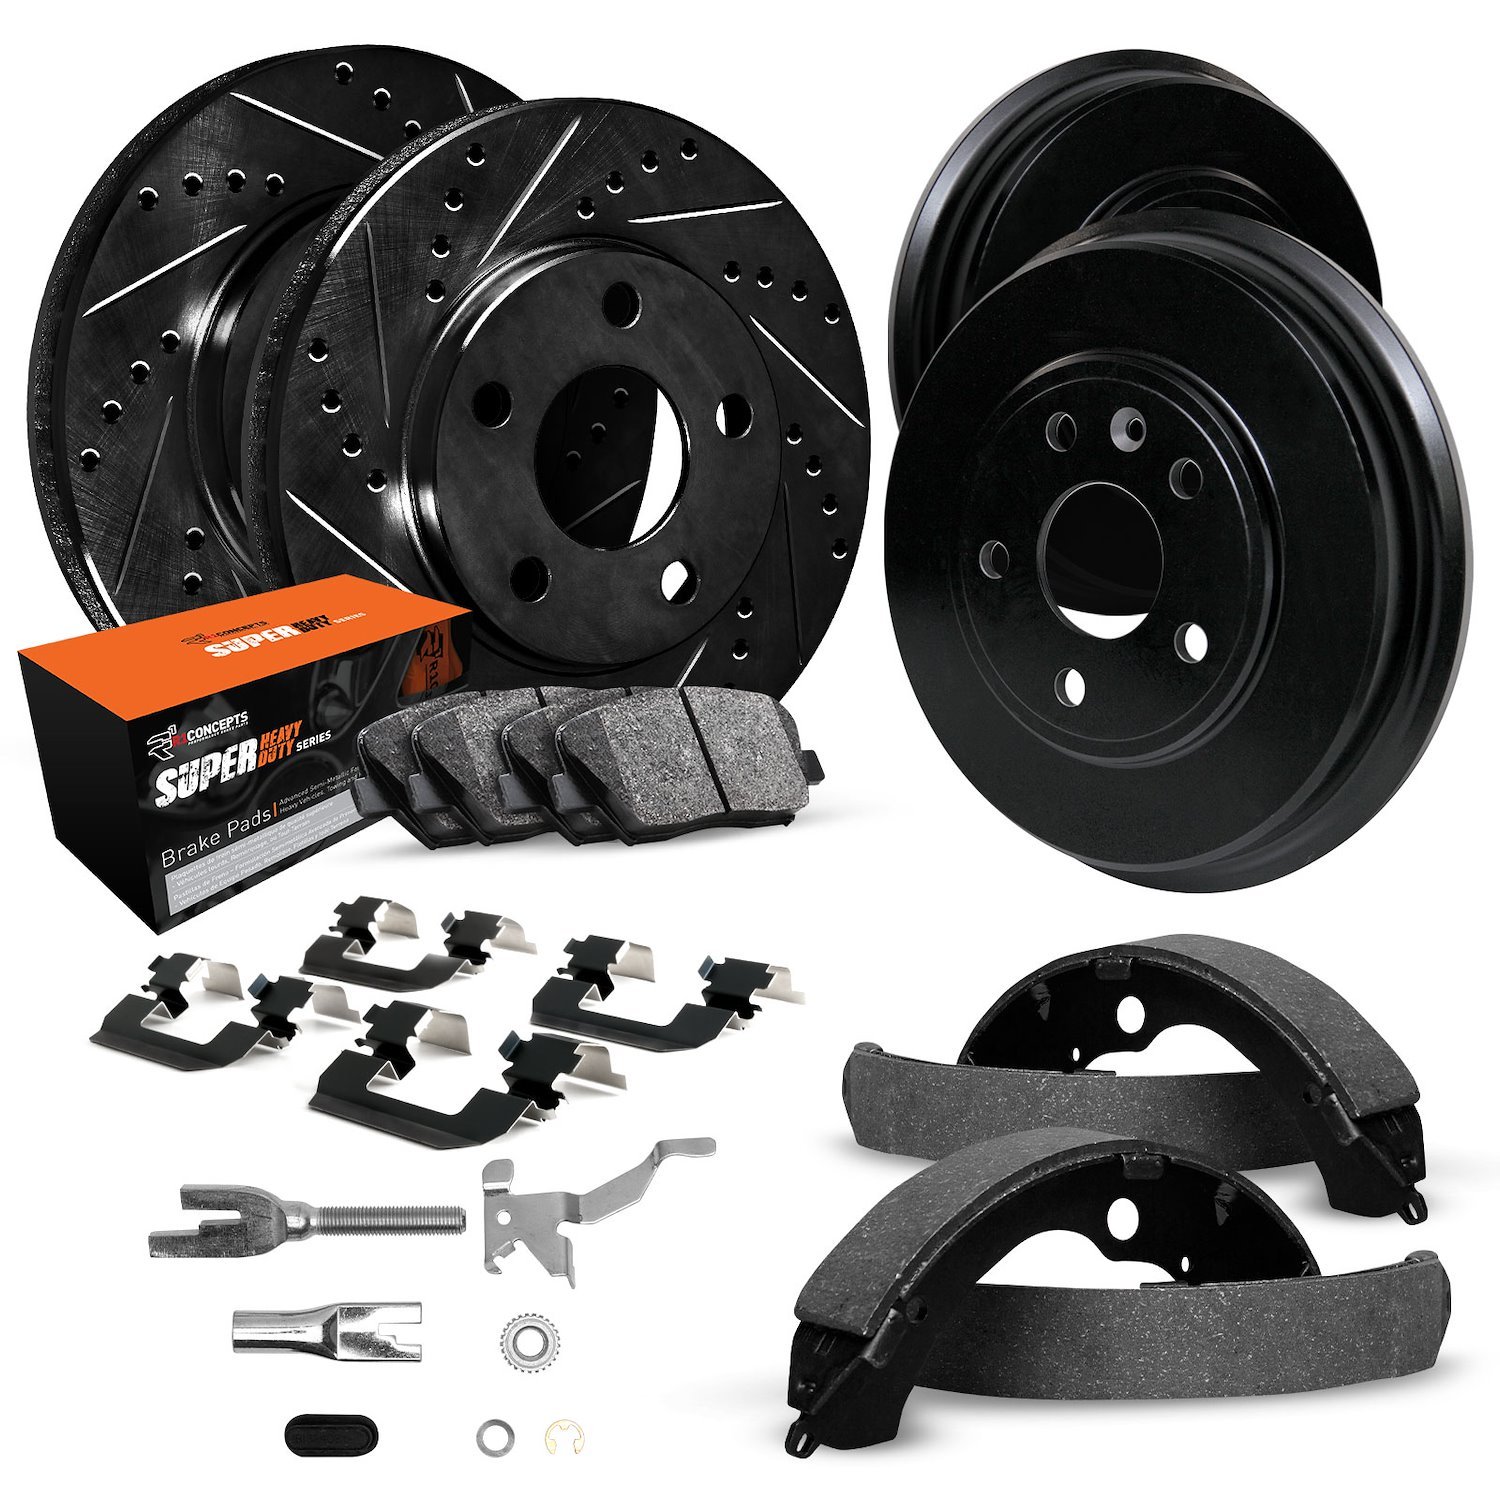 E-Line Drilled/Slotted Black Rotor & Drum Set w/Super-Duty Pads, Shoes, Hardware/Adjusters, 1977-1985 Ford/Lincoln/Mercury/Mazda